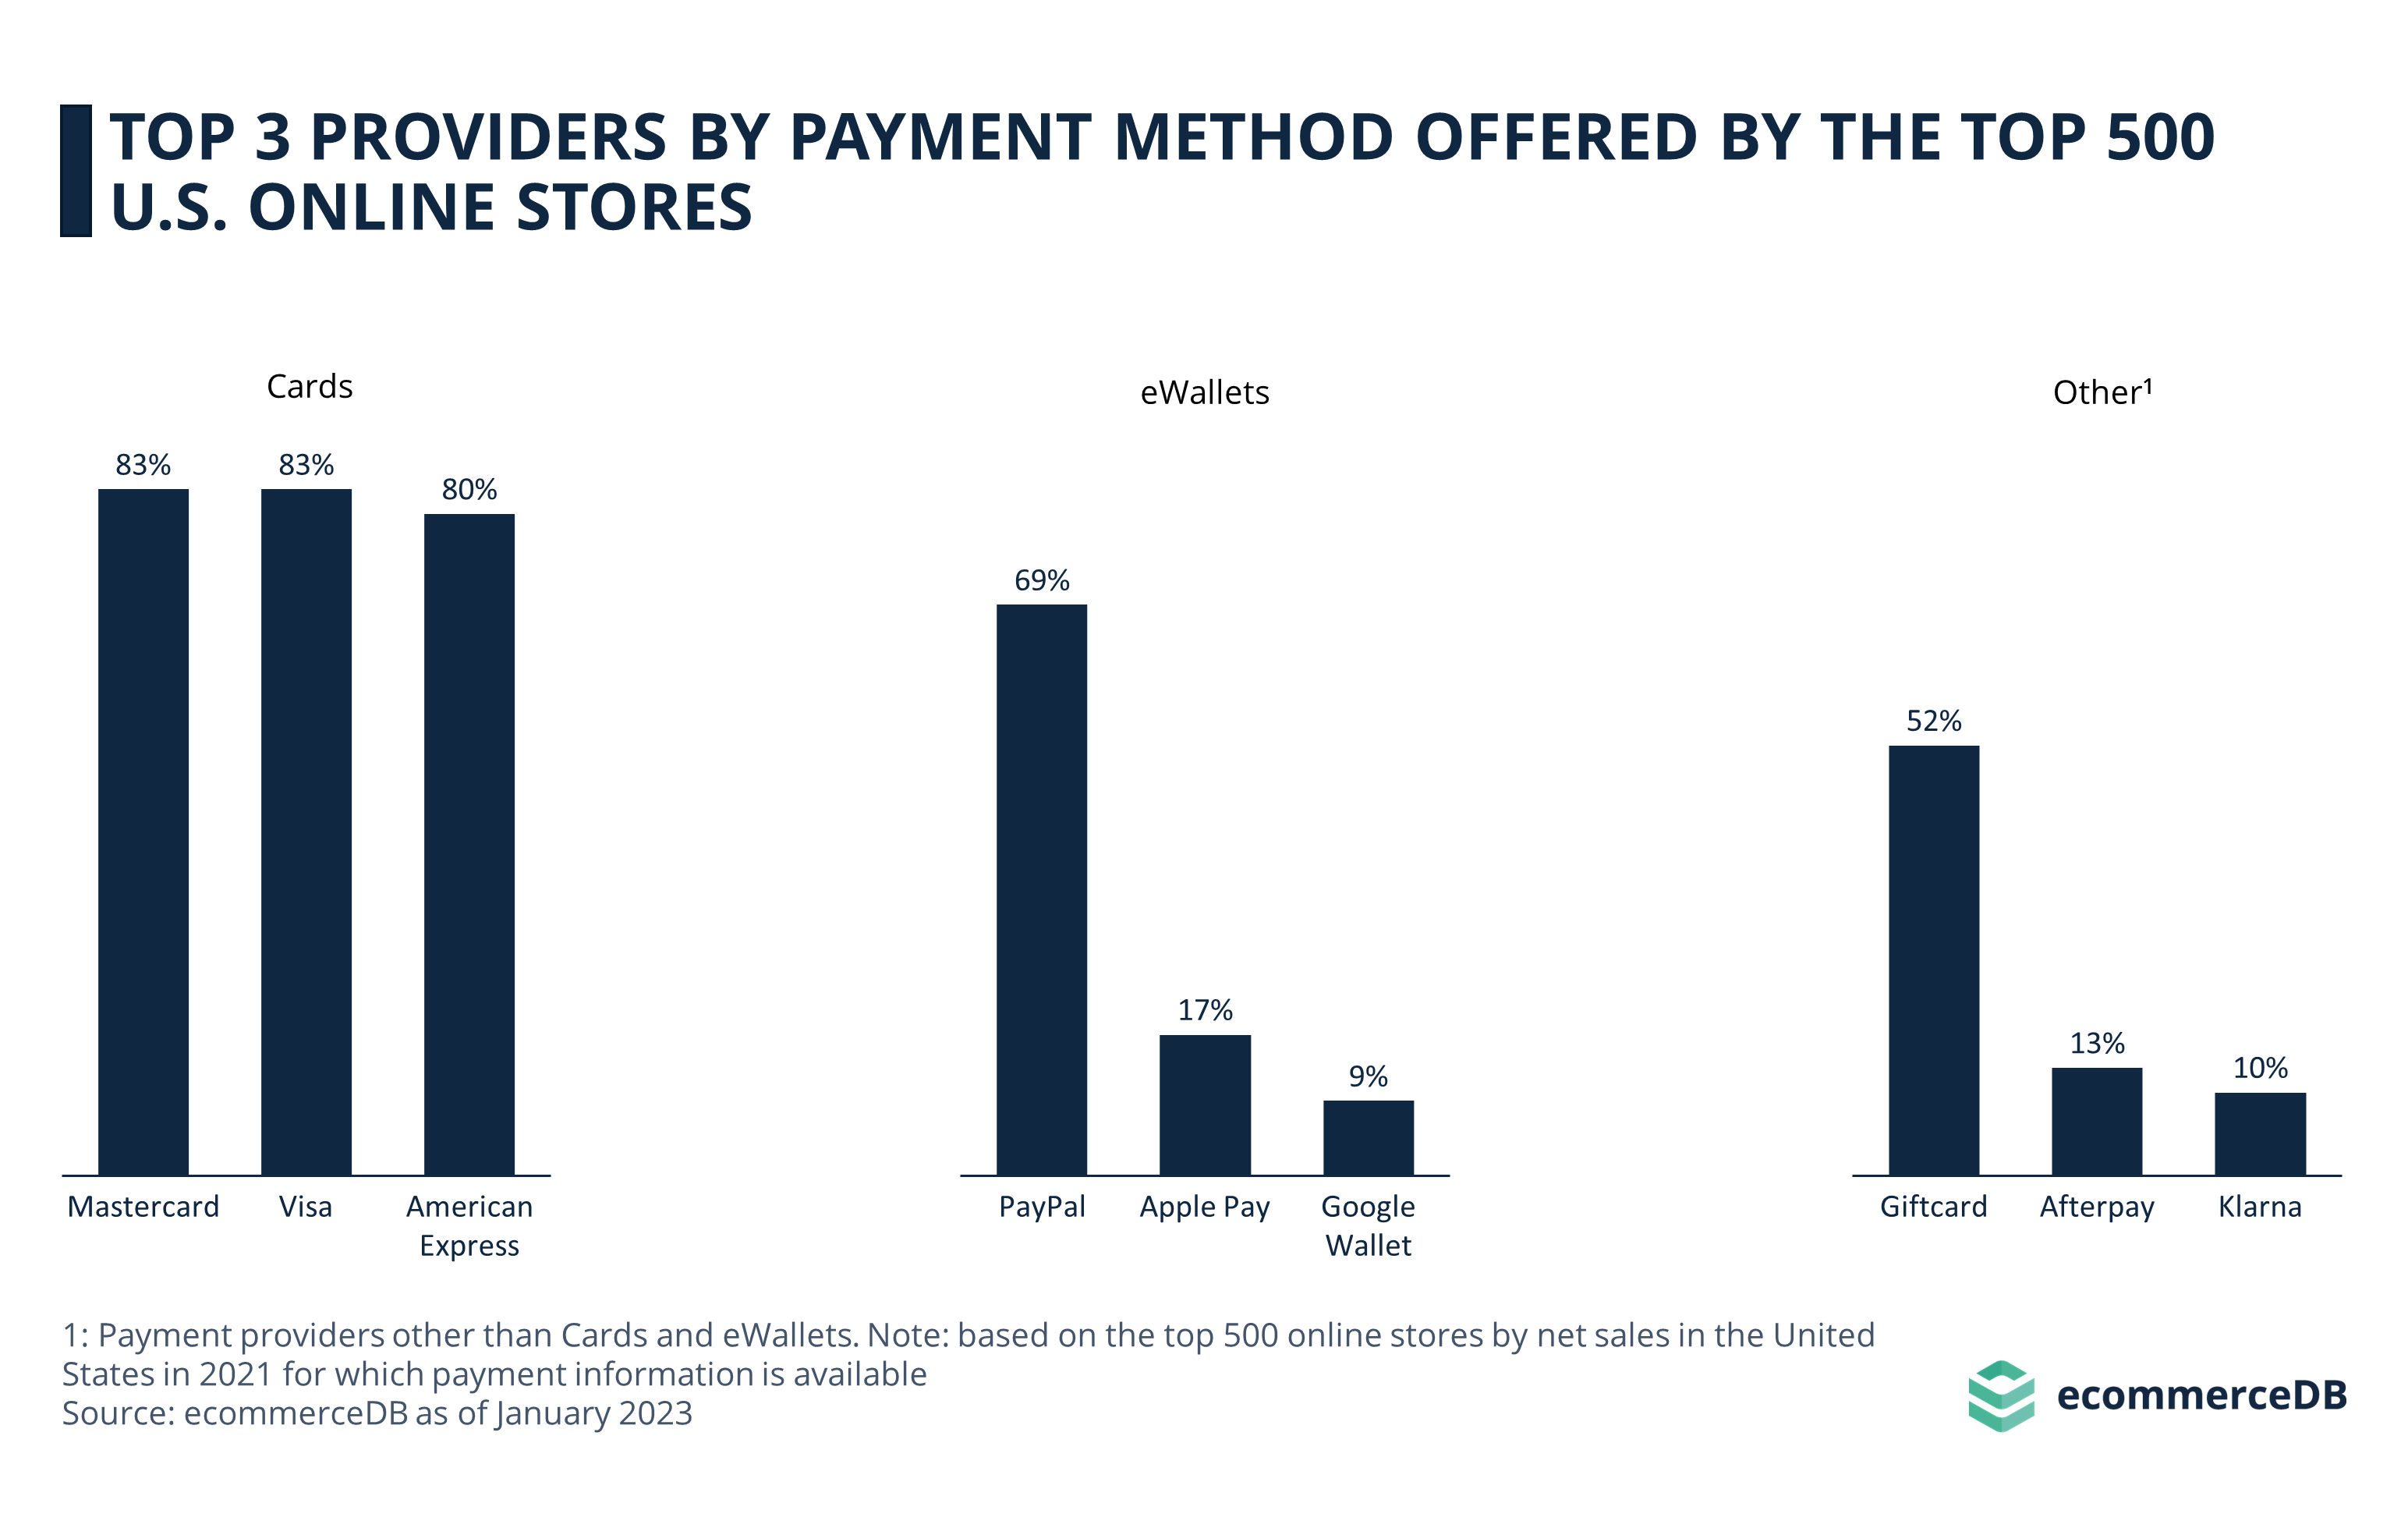 Top 3 Providers by Payment Method Offered by the Top 500 U.S. Online Stores